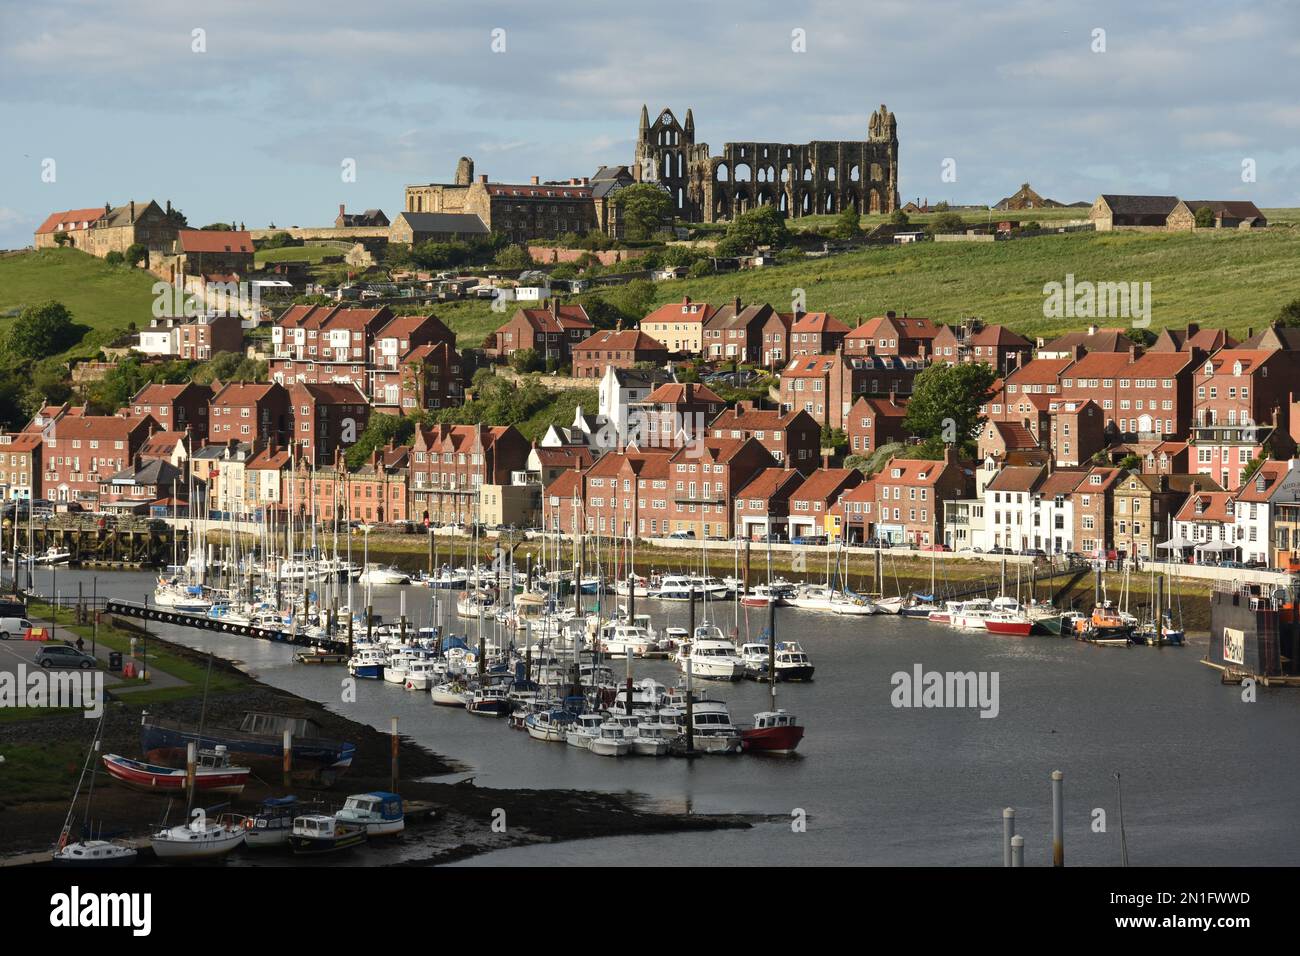 Whitby harbour and abbey ruins, Whitby, Yorkshire, England, United Kingdom, Europe Stock Photo